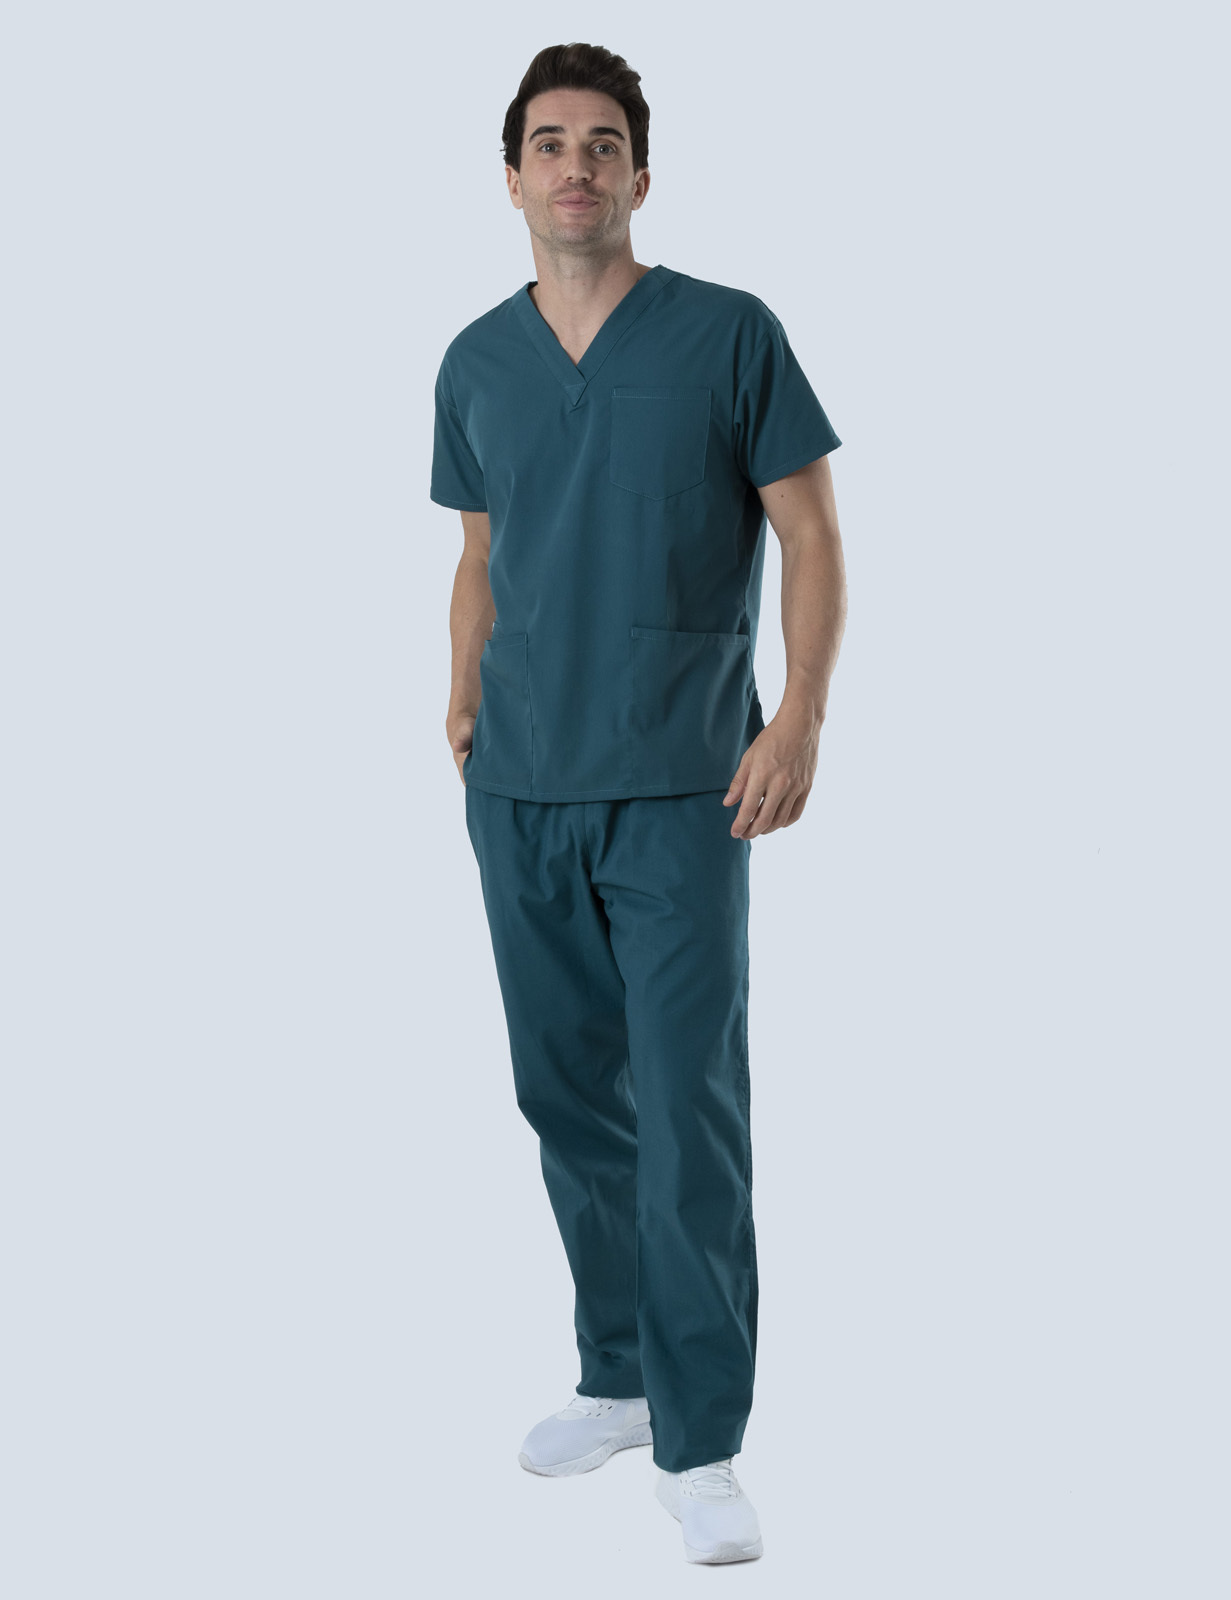 Ipswich Hospital Occupational Therapy-Allied Health Assistant Uniform Set Bundle ( 4 Pocket Scrub Top And Cargo Scrub Pants In Caribbean + 2 Logos